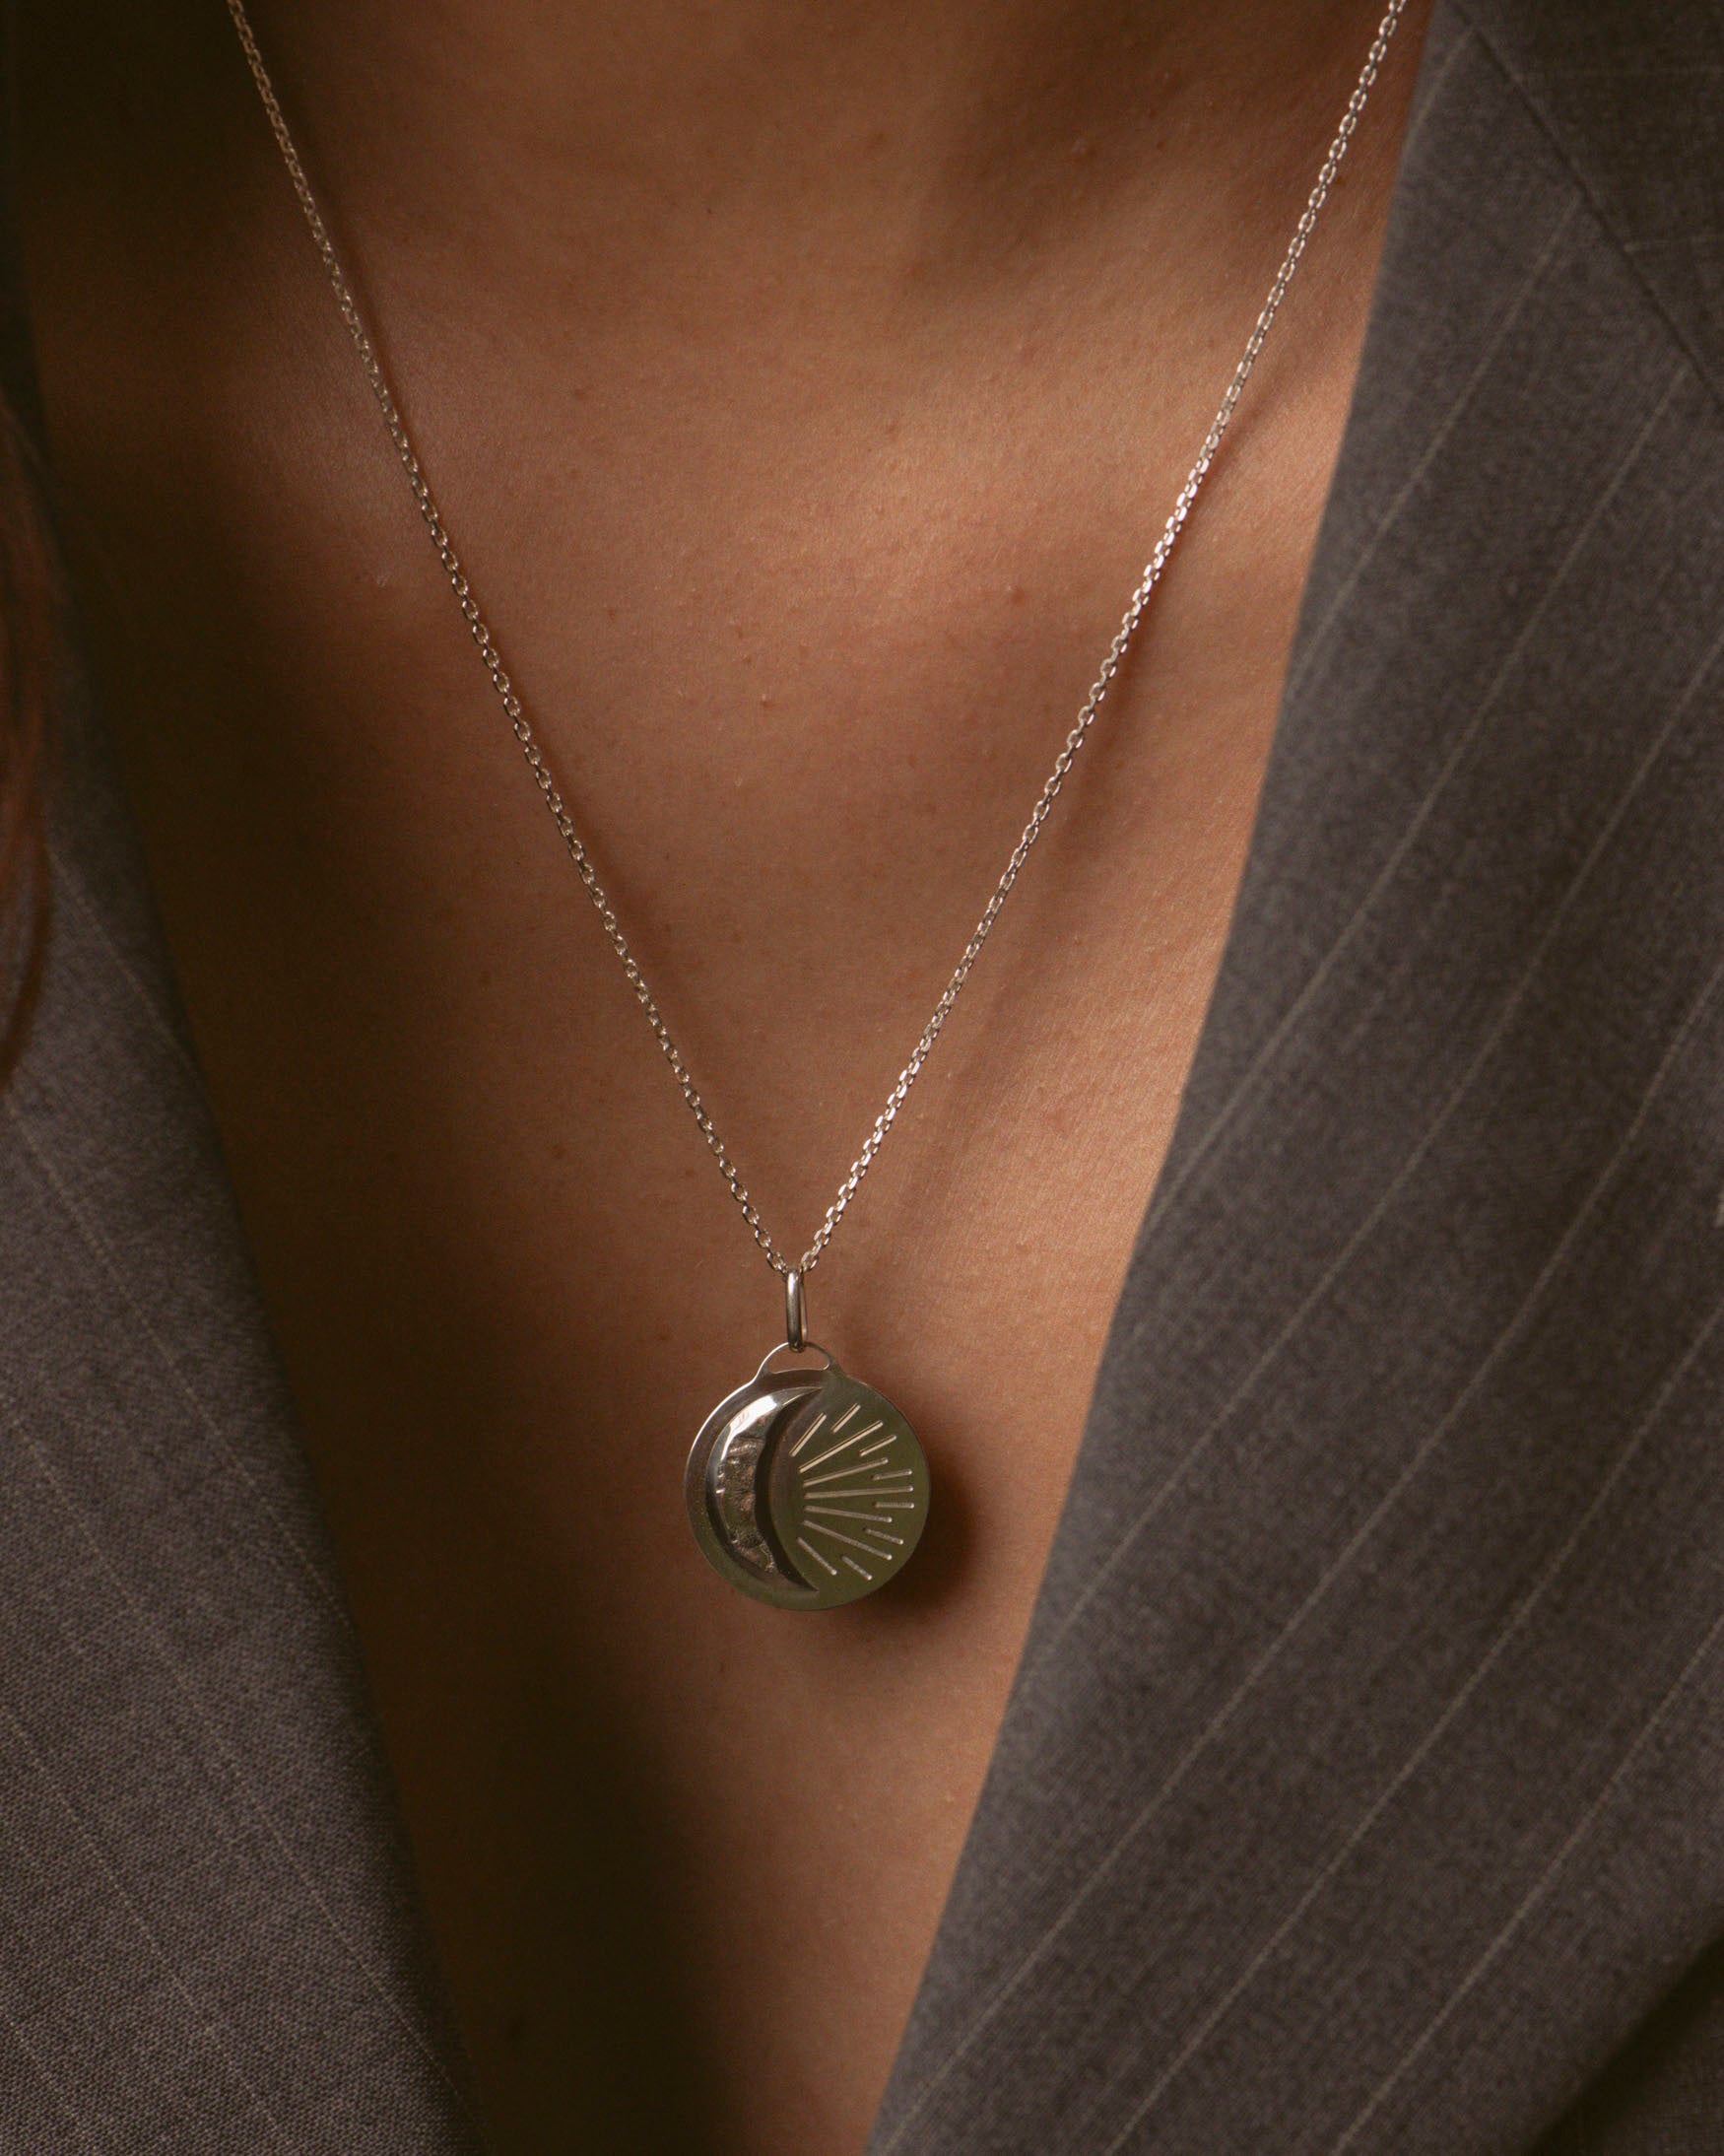 Baly necklace